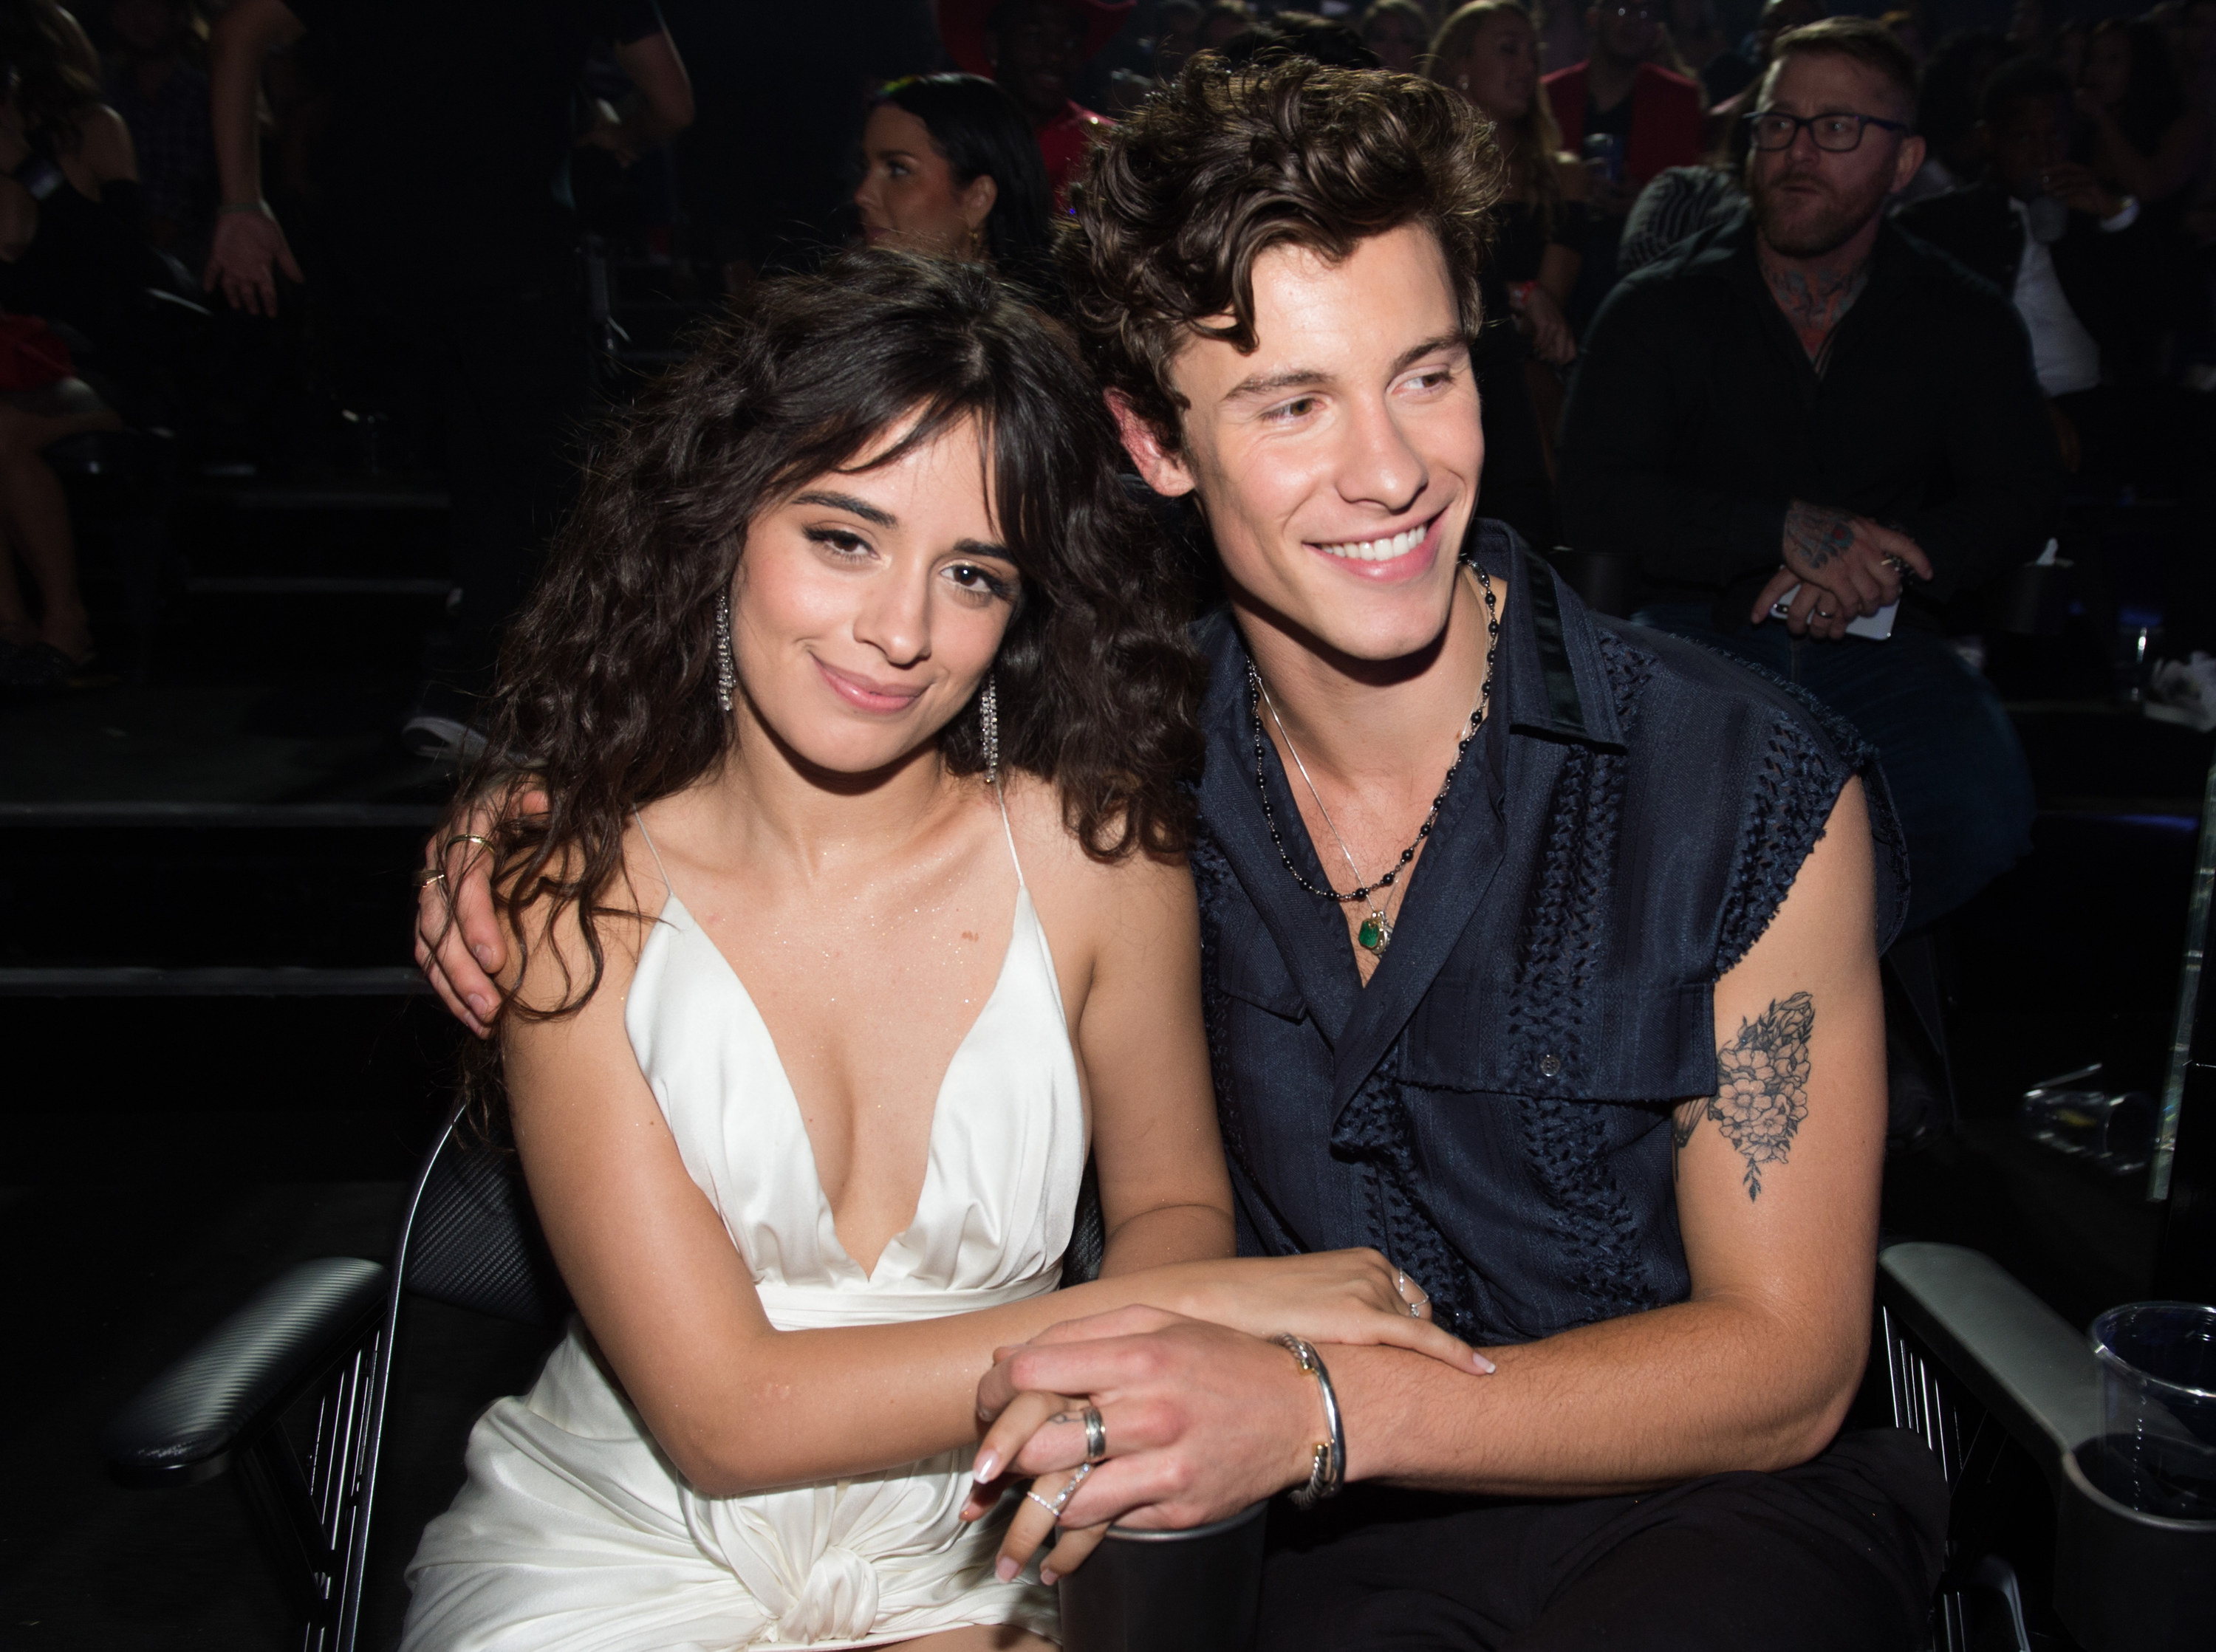 Shawn puts his arm around Camila while sitting at an event